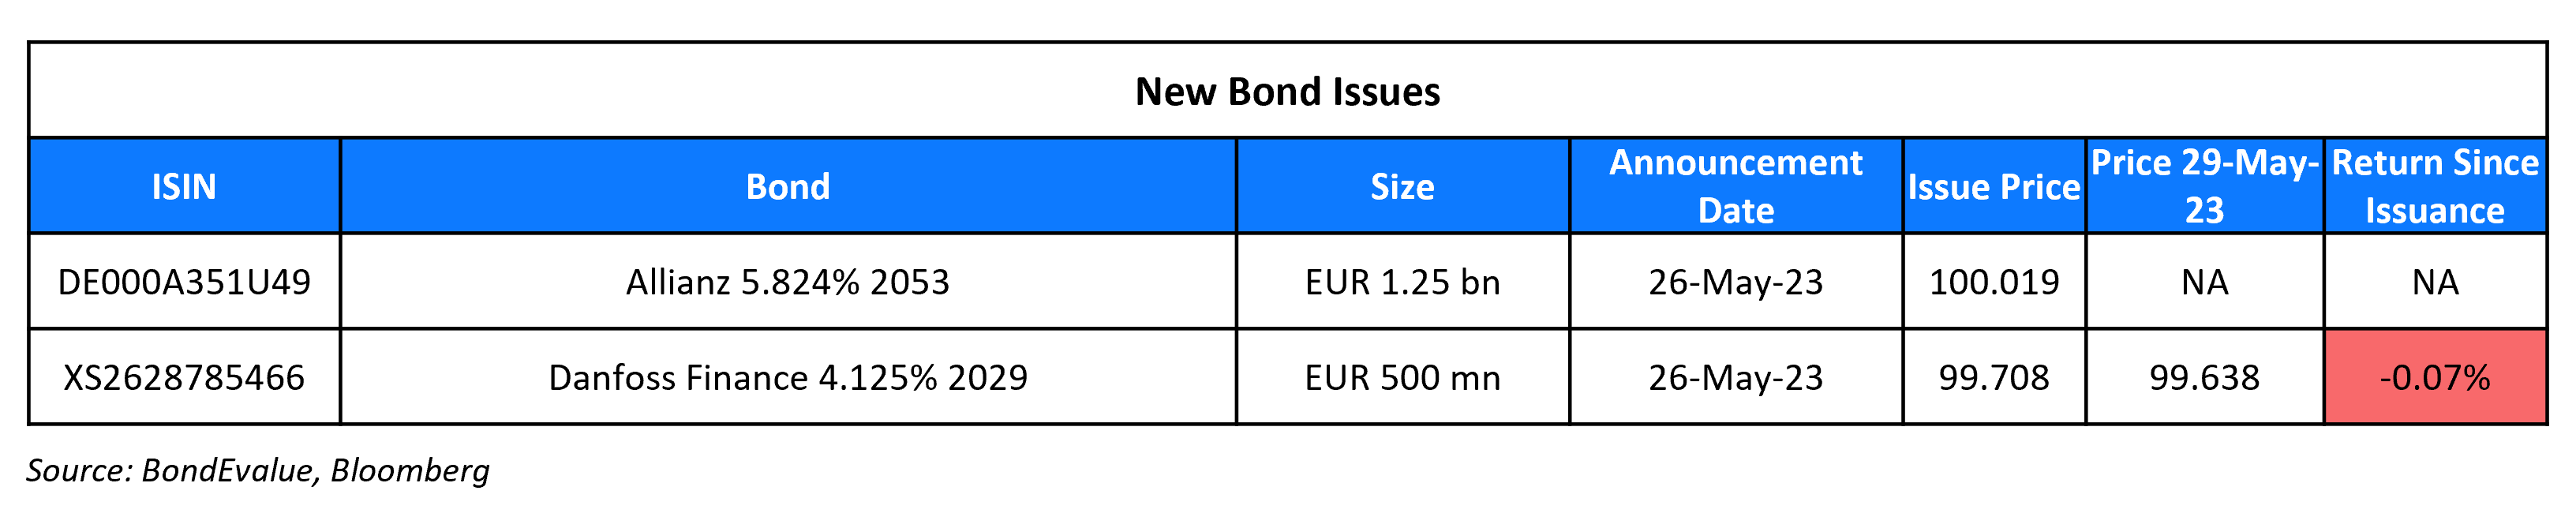 New Bond Issues 29 May 23 (1)